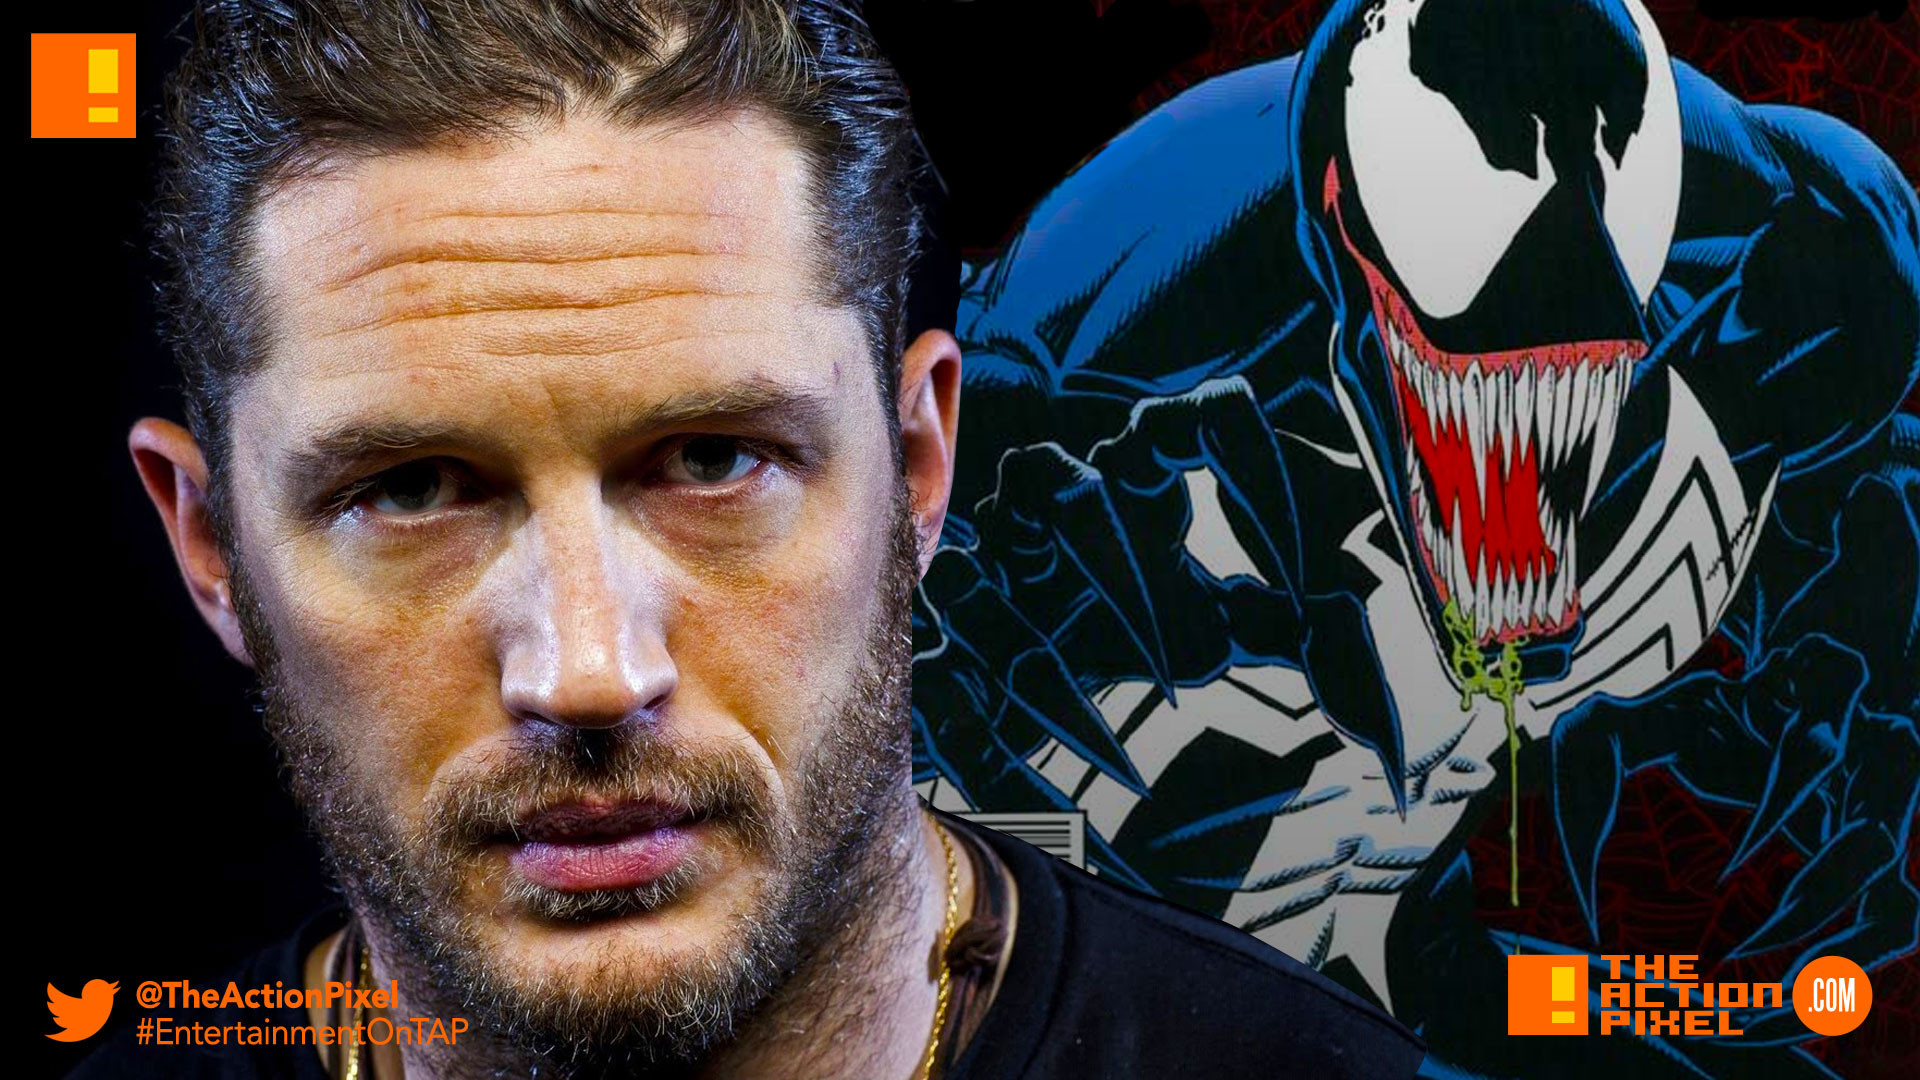 tom hardy, venom, spider-man, spin-off, the action pixel, entertainment on tap,sony picturestom hardy, venom, spider-man, spin-off, the action pixel, entertainment on tap,sony pictures